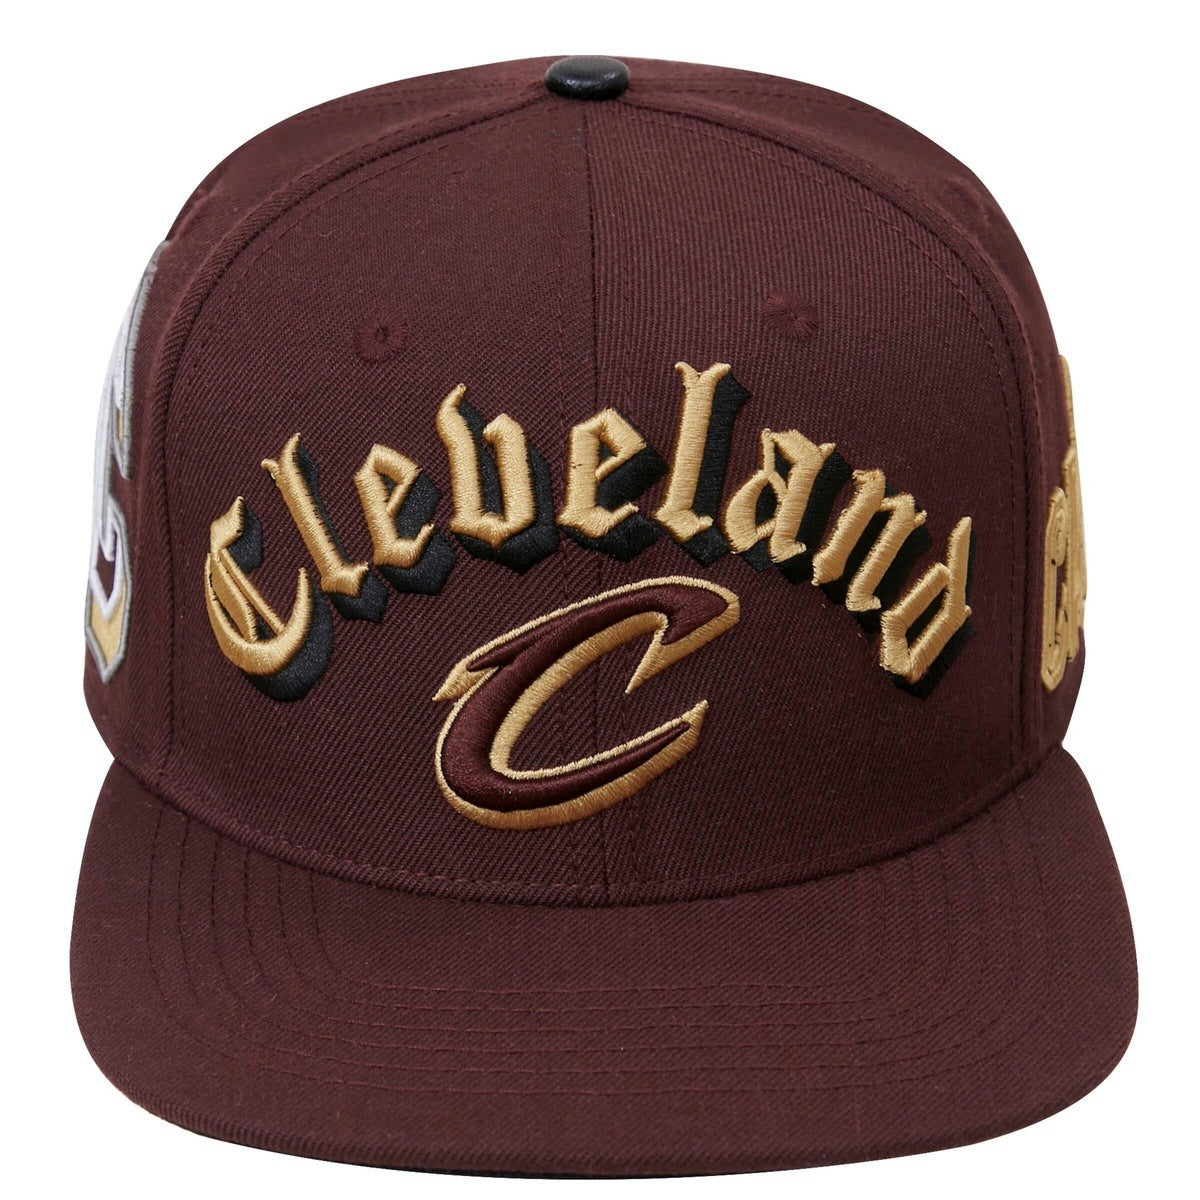 CLEVELAND CAVALIERS OLD ENGLISH WOOL SNAPBACK HAT (WINE) – Pro